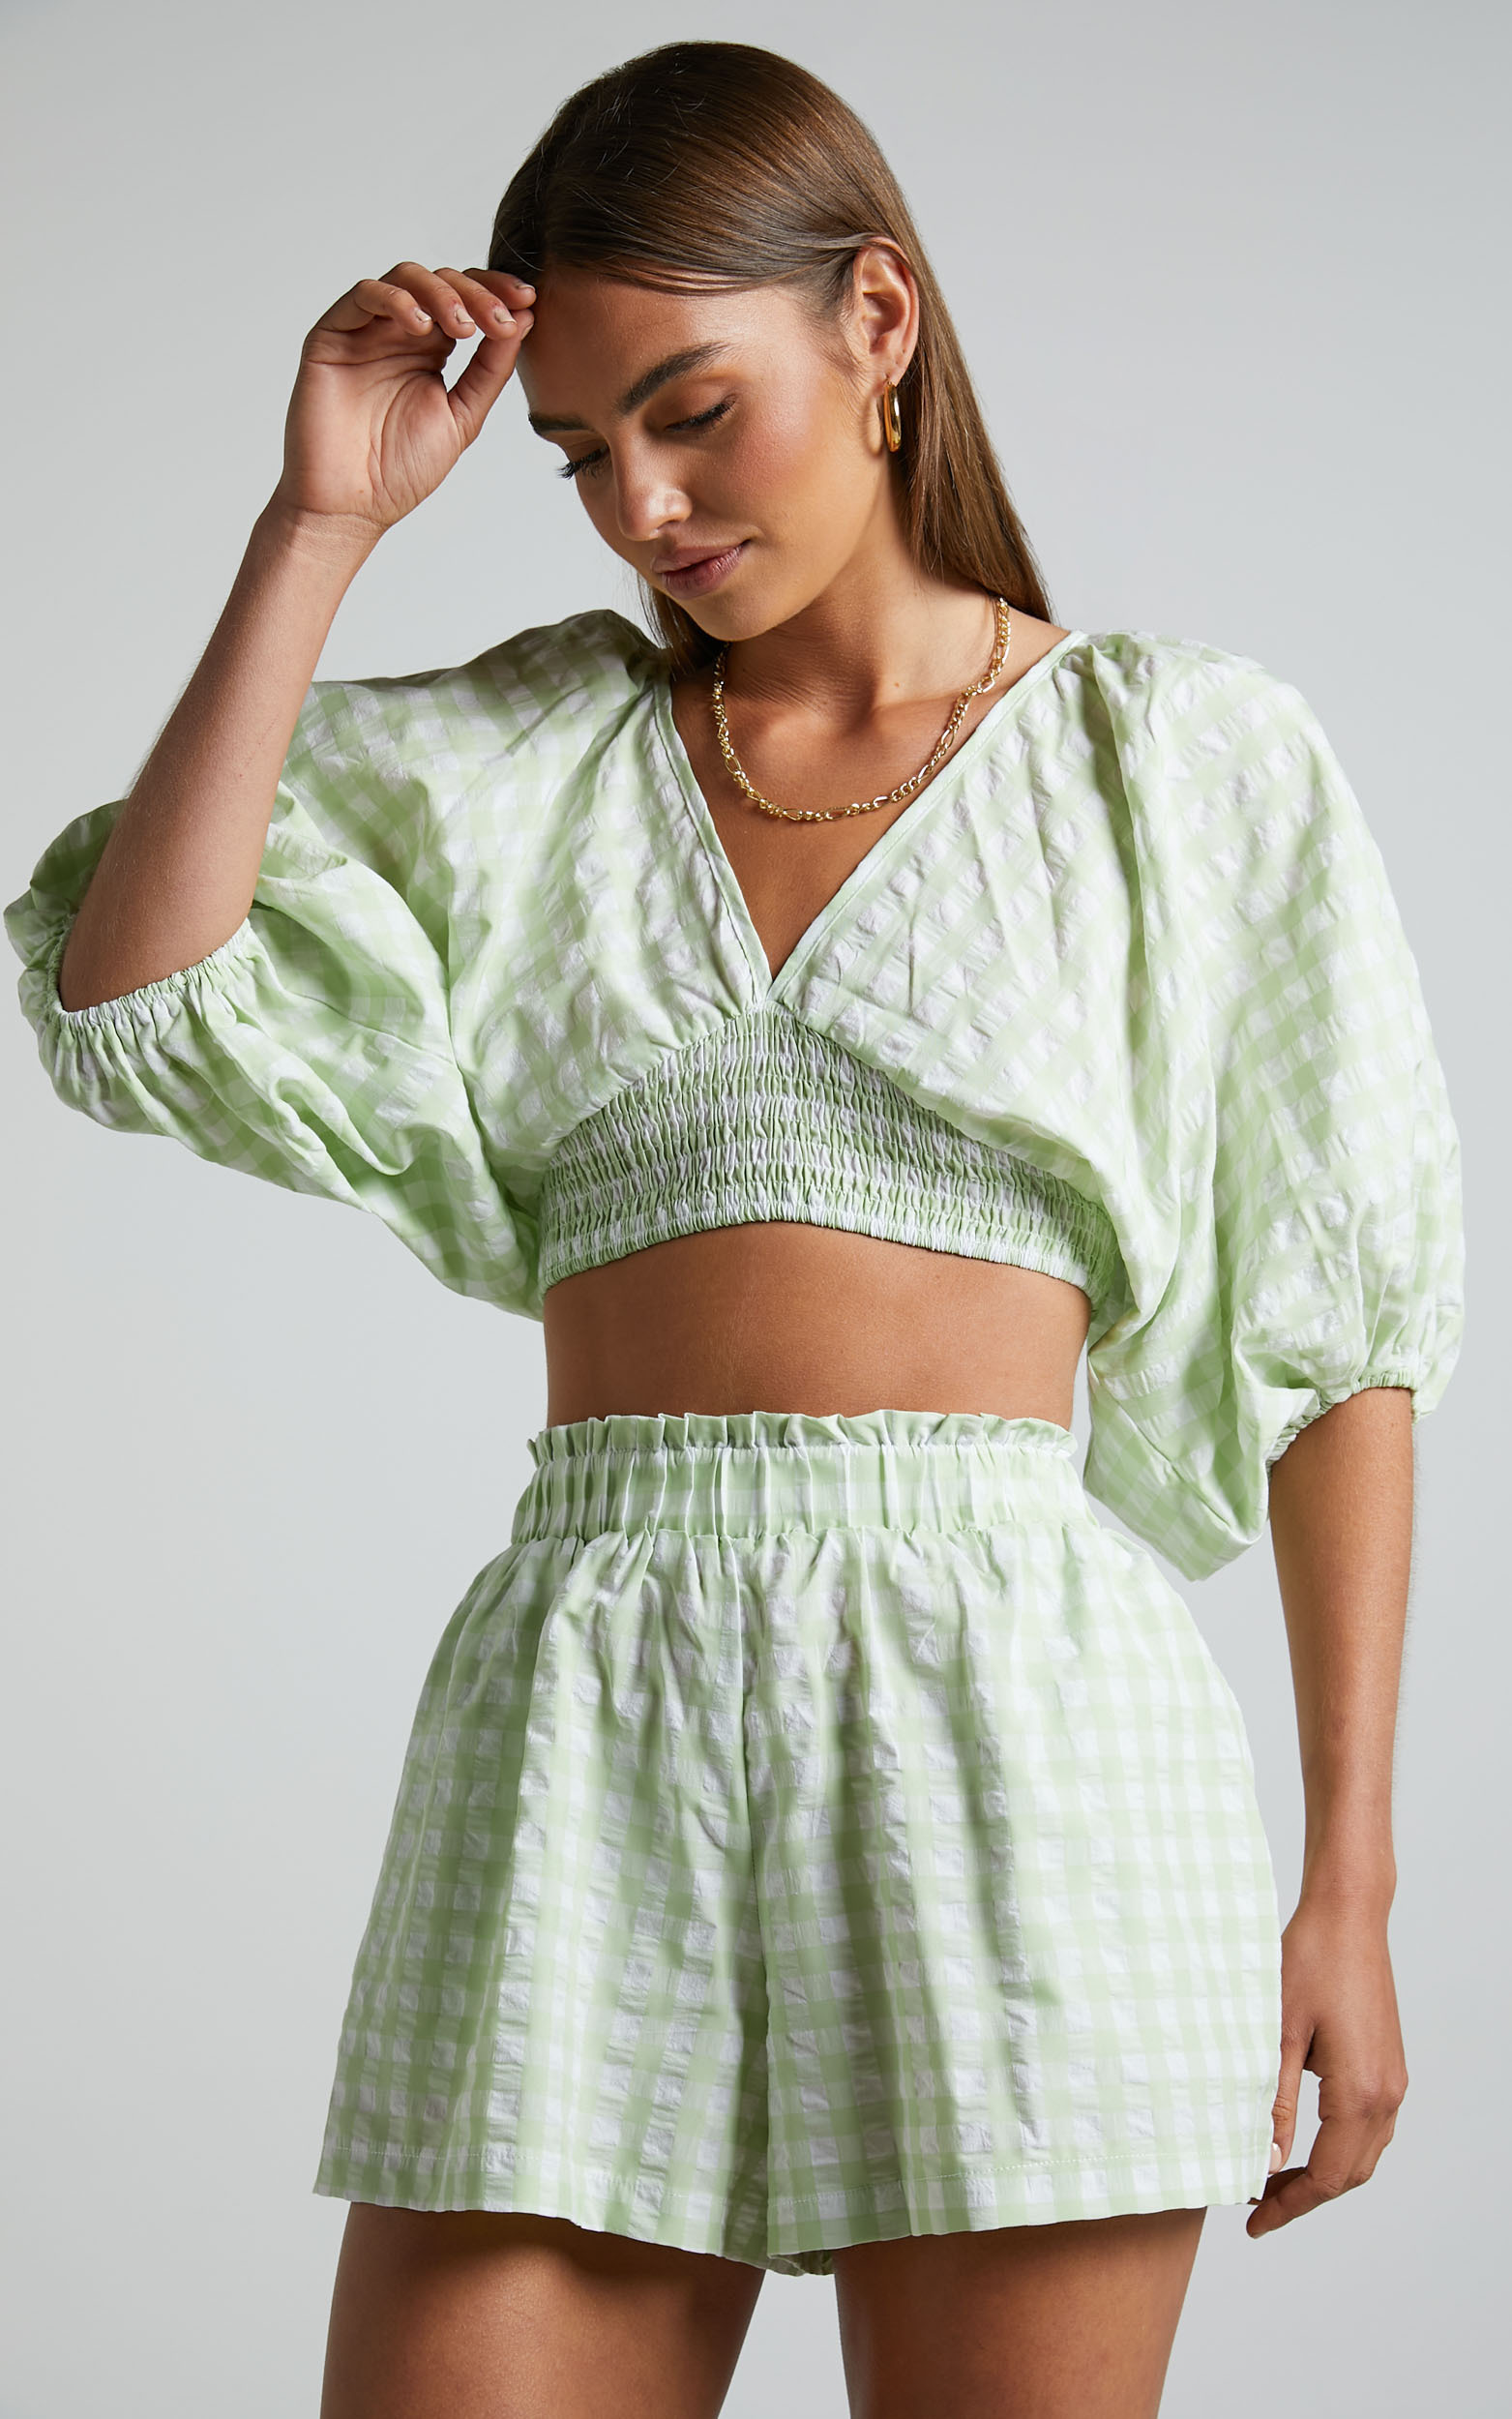 Madelyn Top - V Neck Batwing Puff Sleeve Crop Top in Mint Gingham - 04, GRN1, hi-res image number null